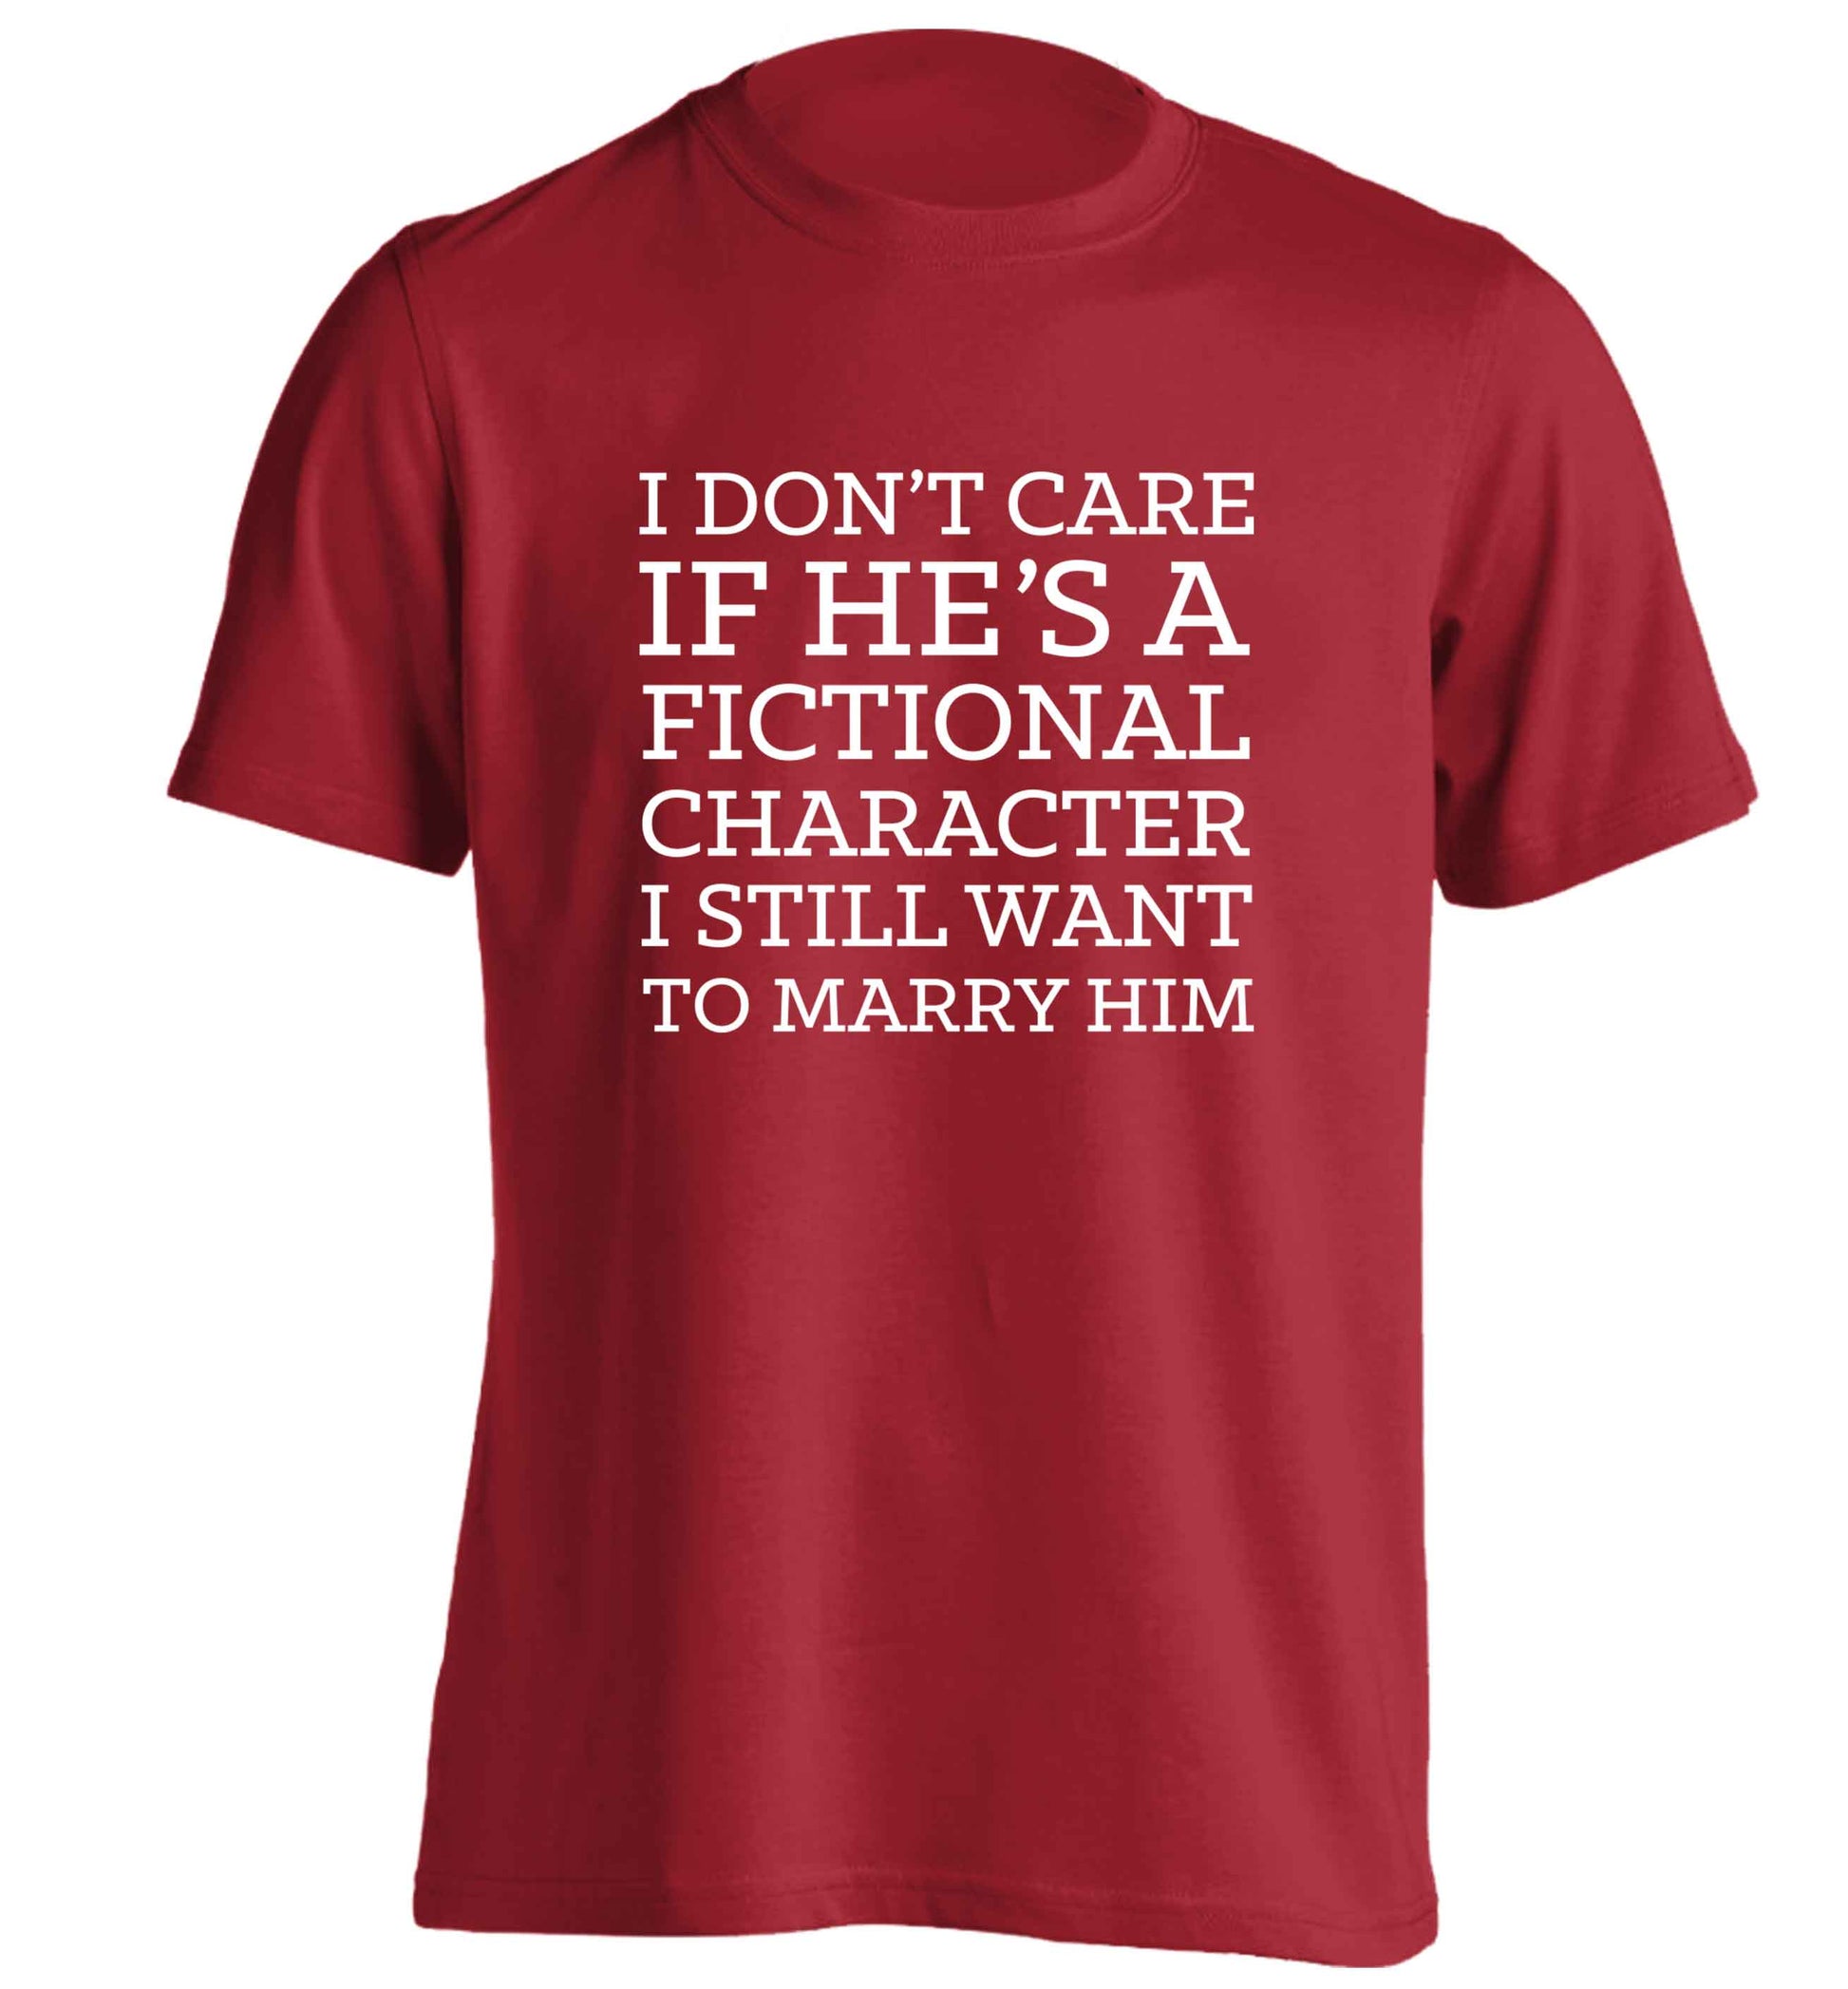 I don't care if he's a fictional character I still want to marry him adults unisex red Tshirt 2XL